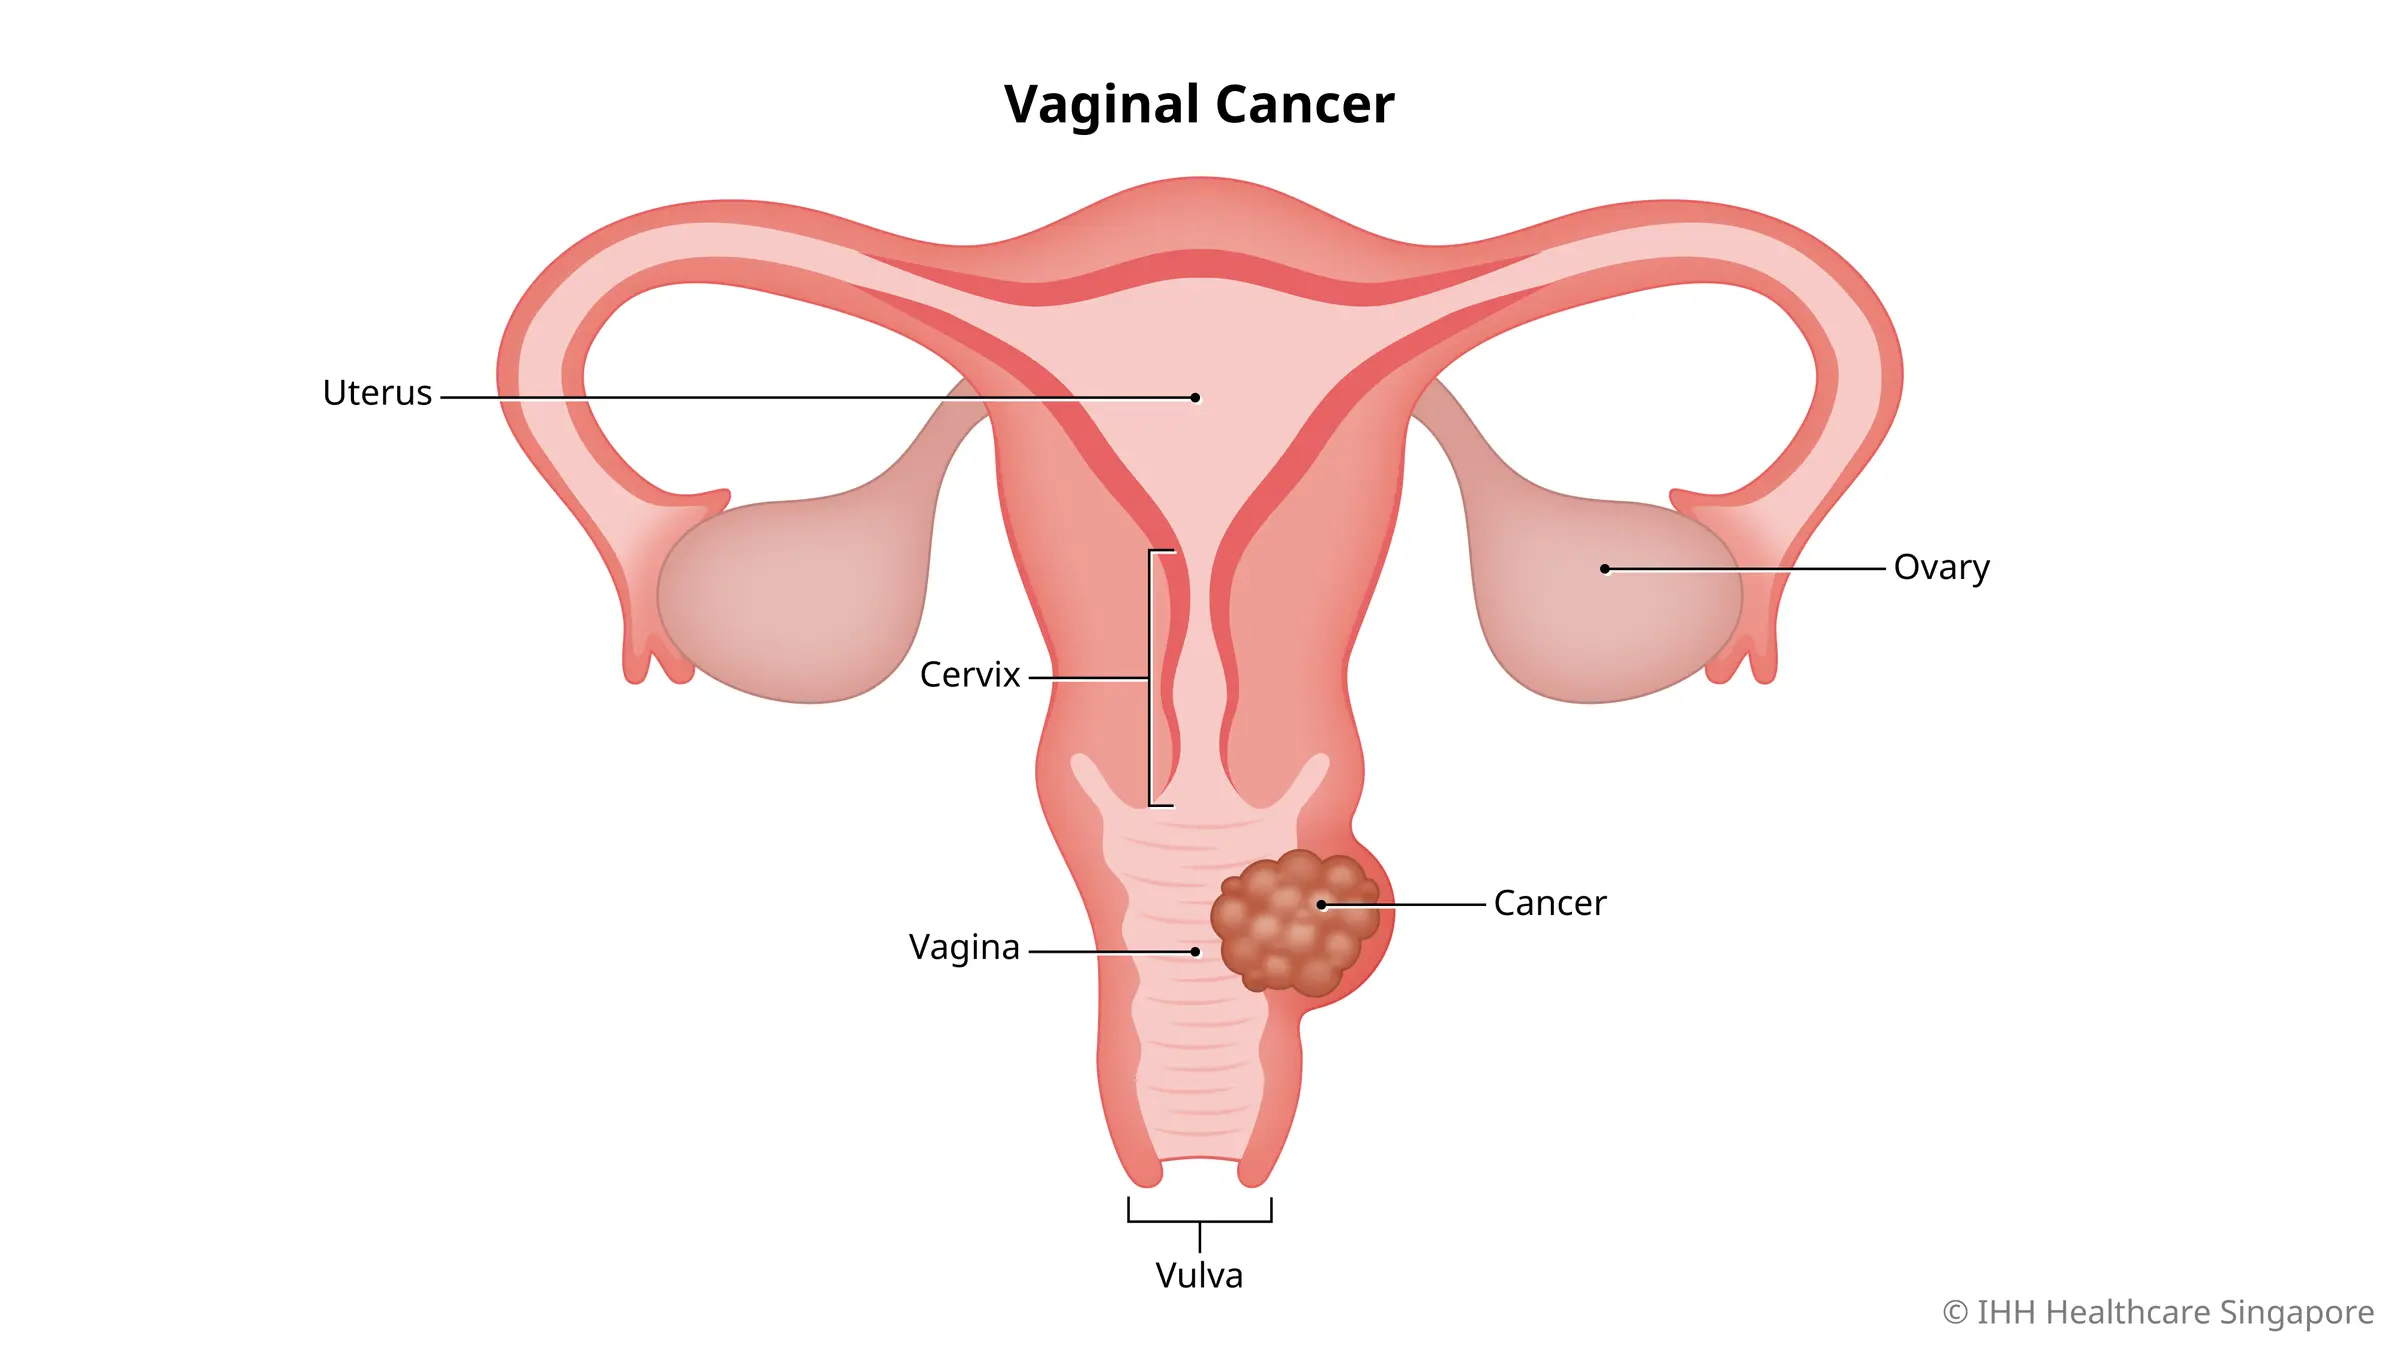 What is vaginal cancer?